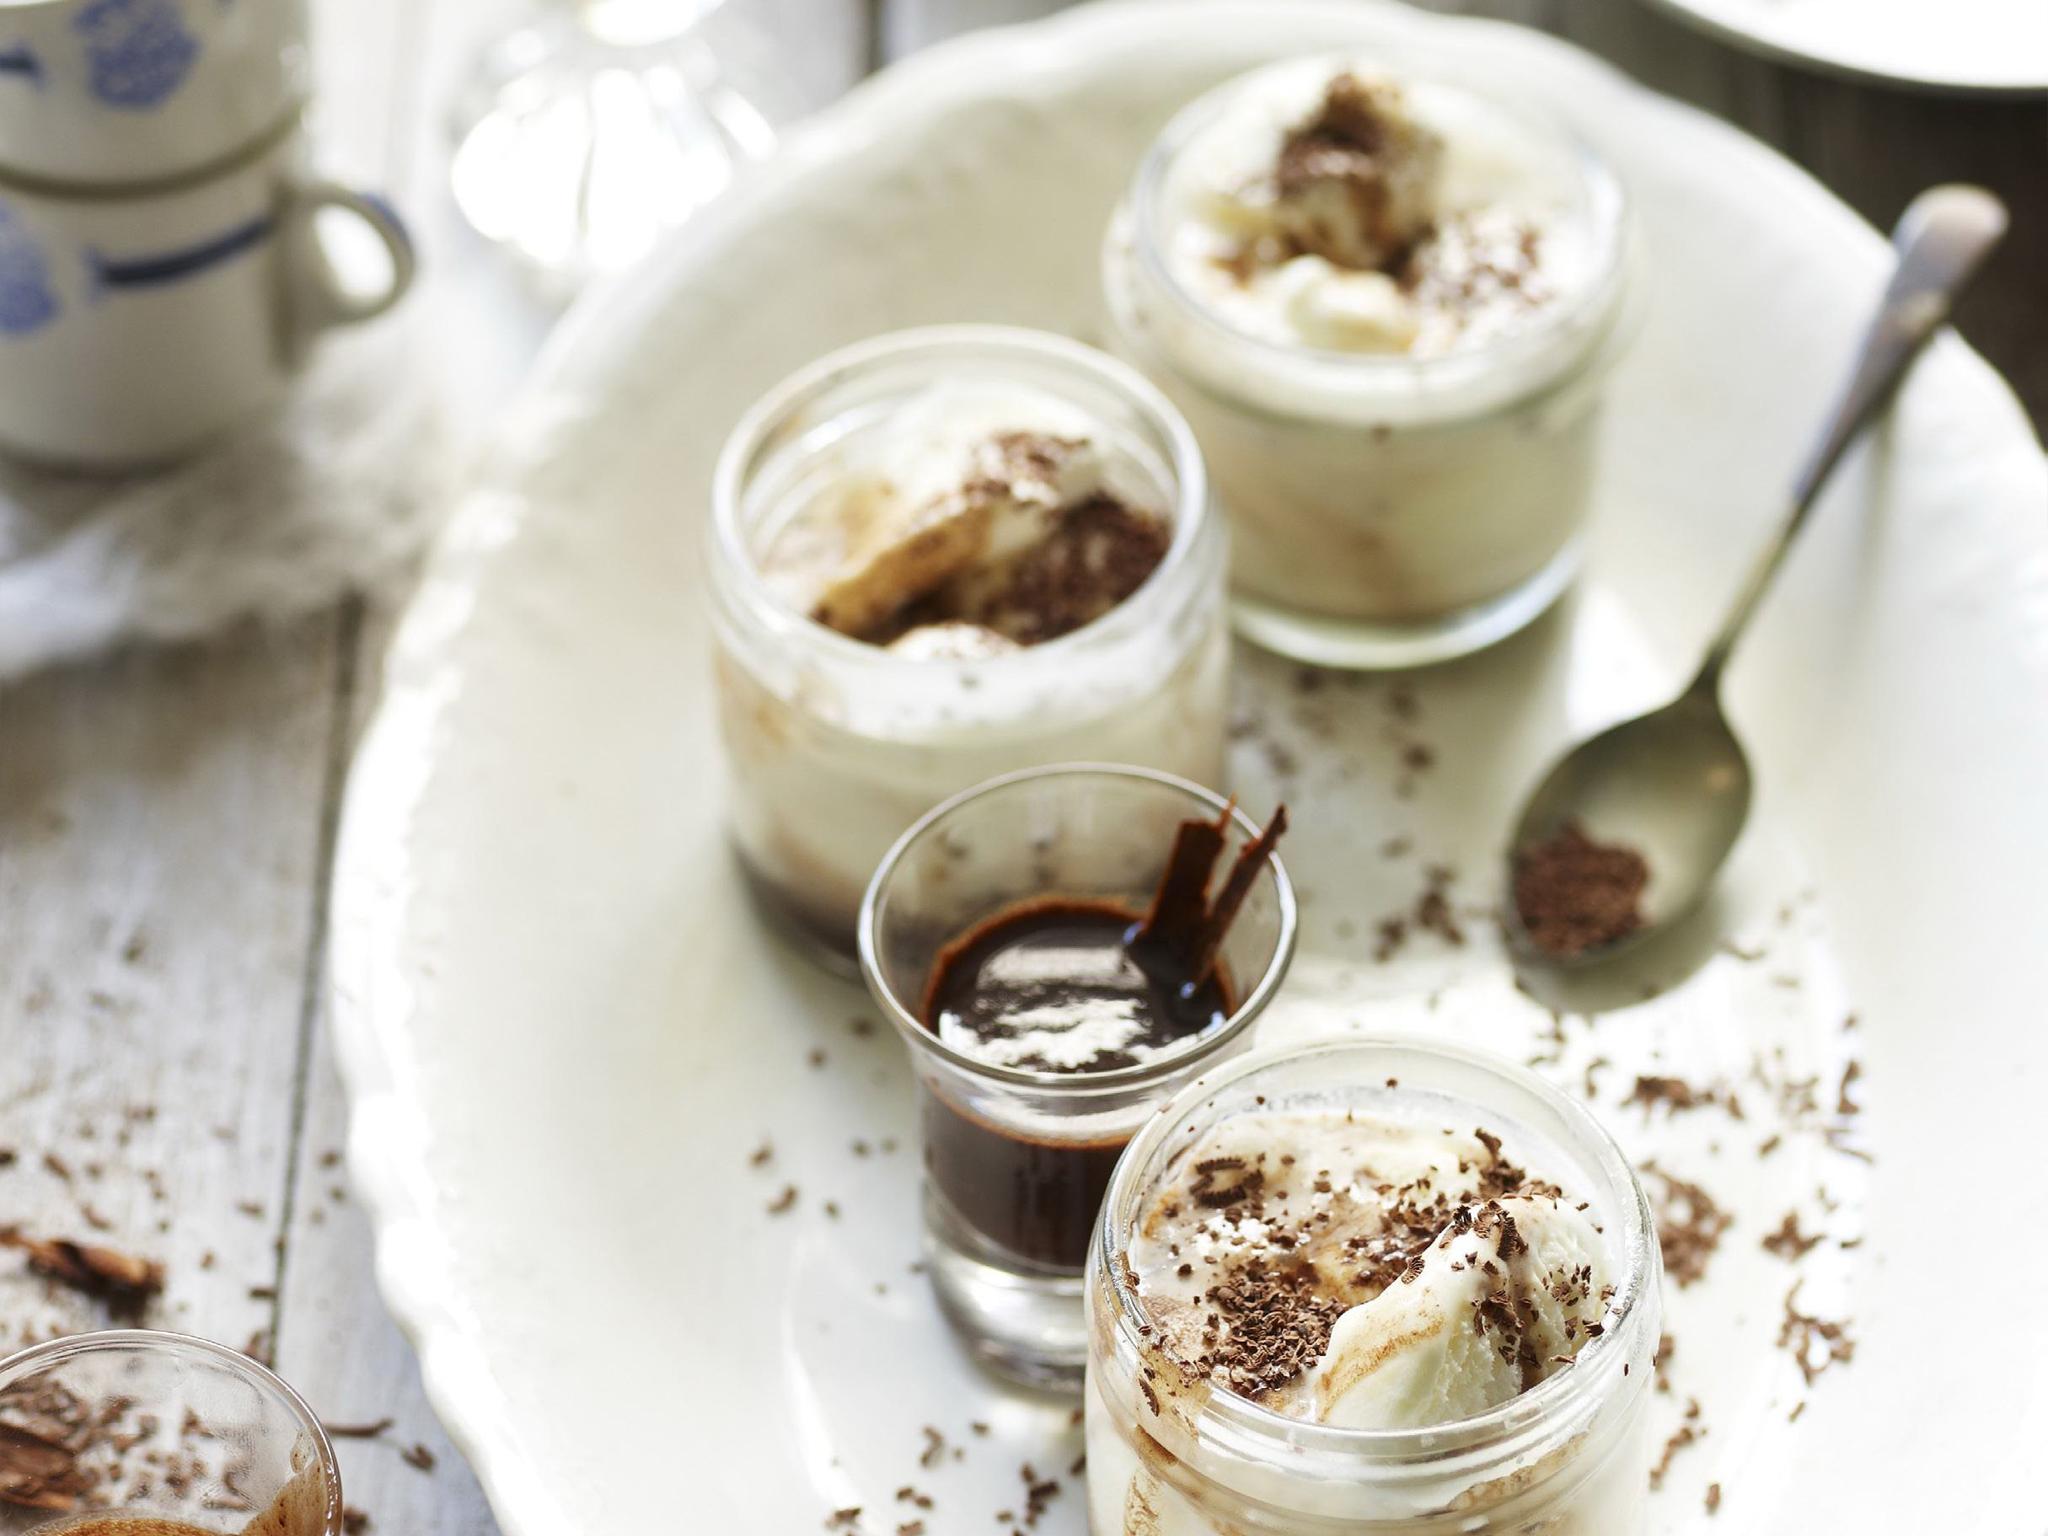 Our easiest, yummiest and quickest dessert recipes ever